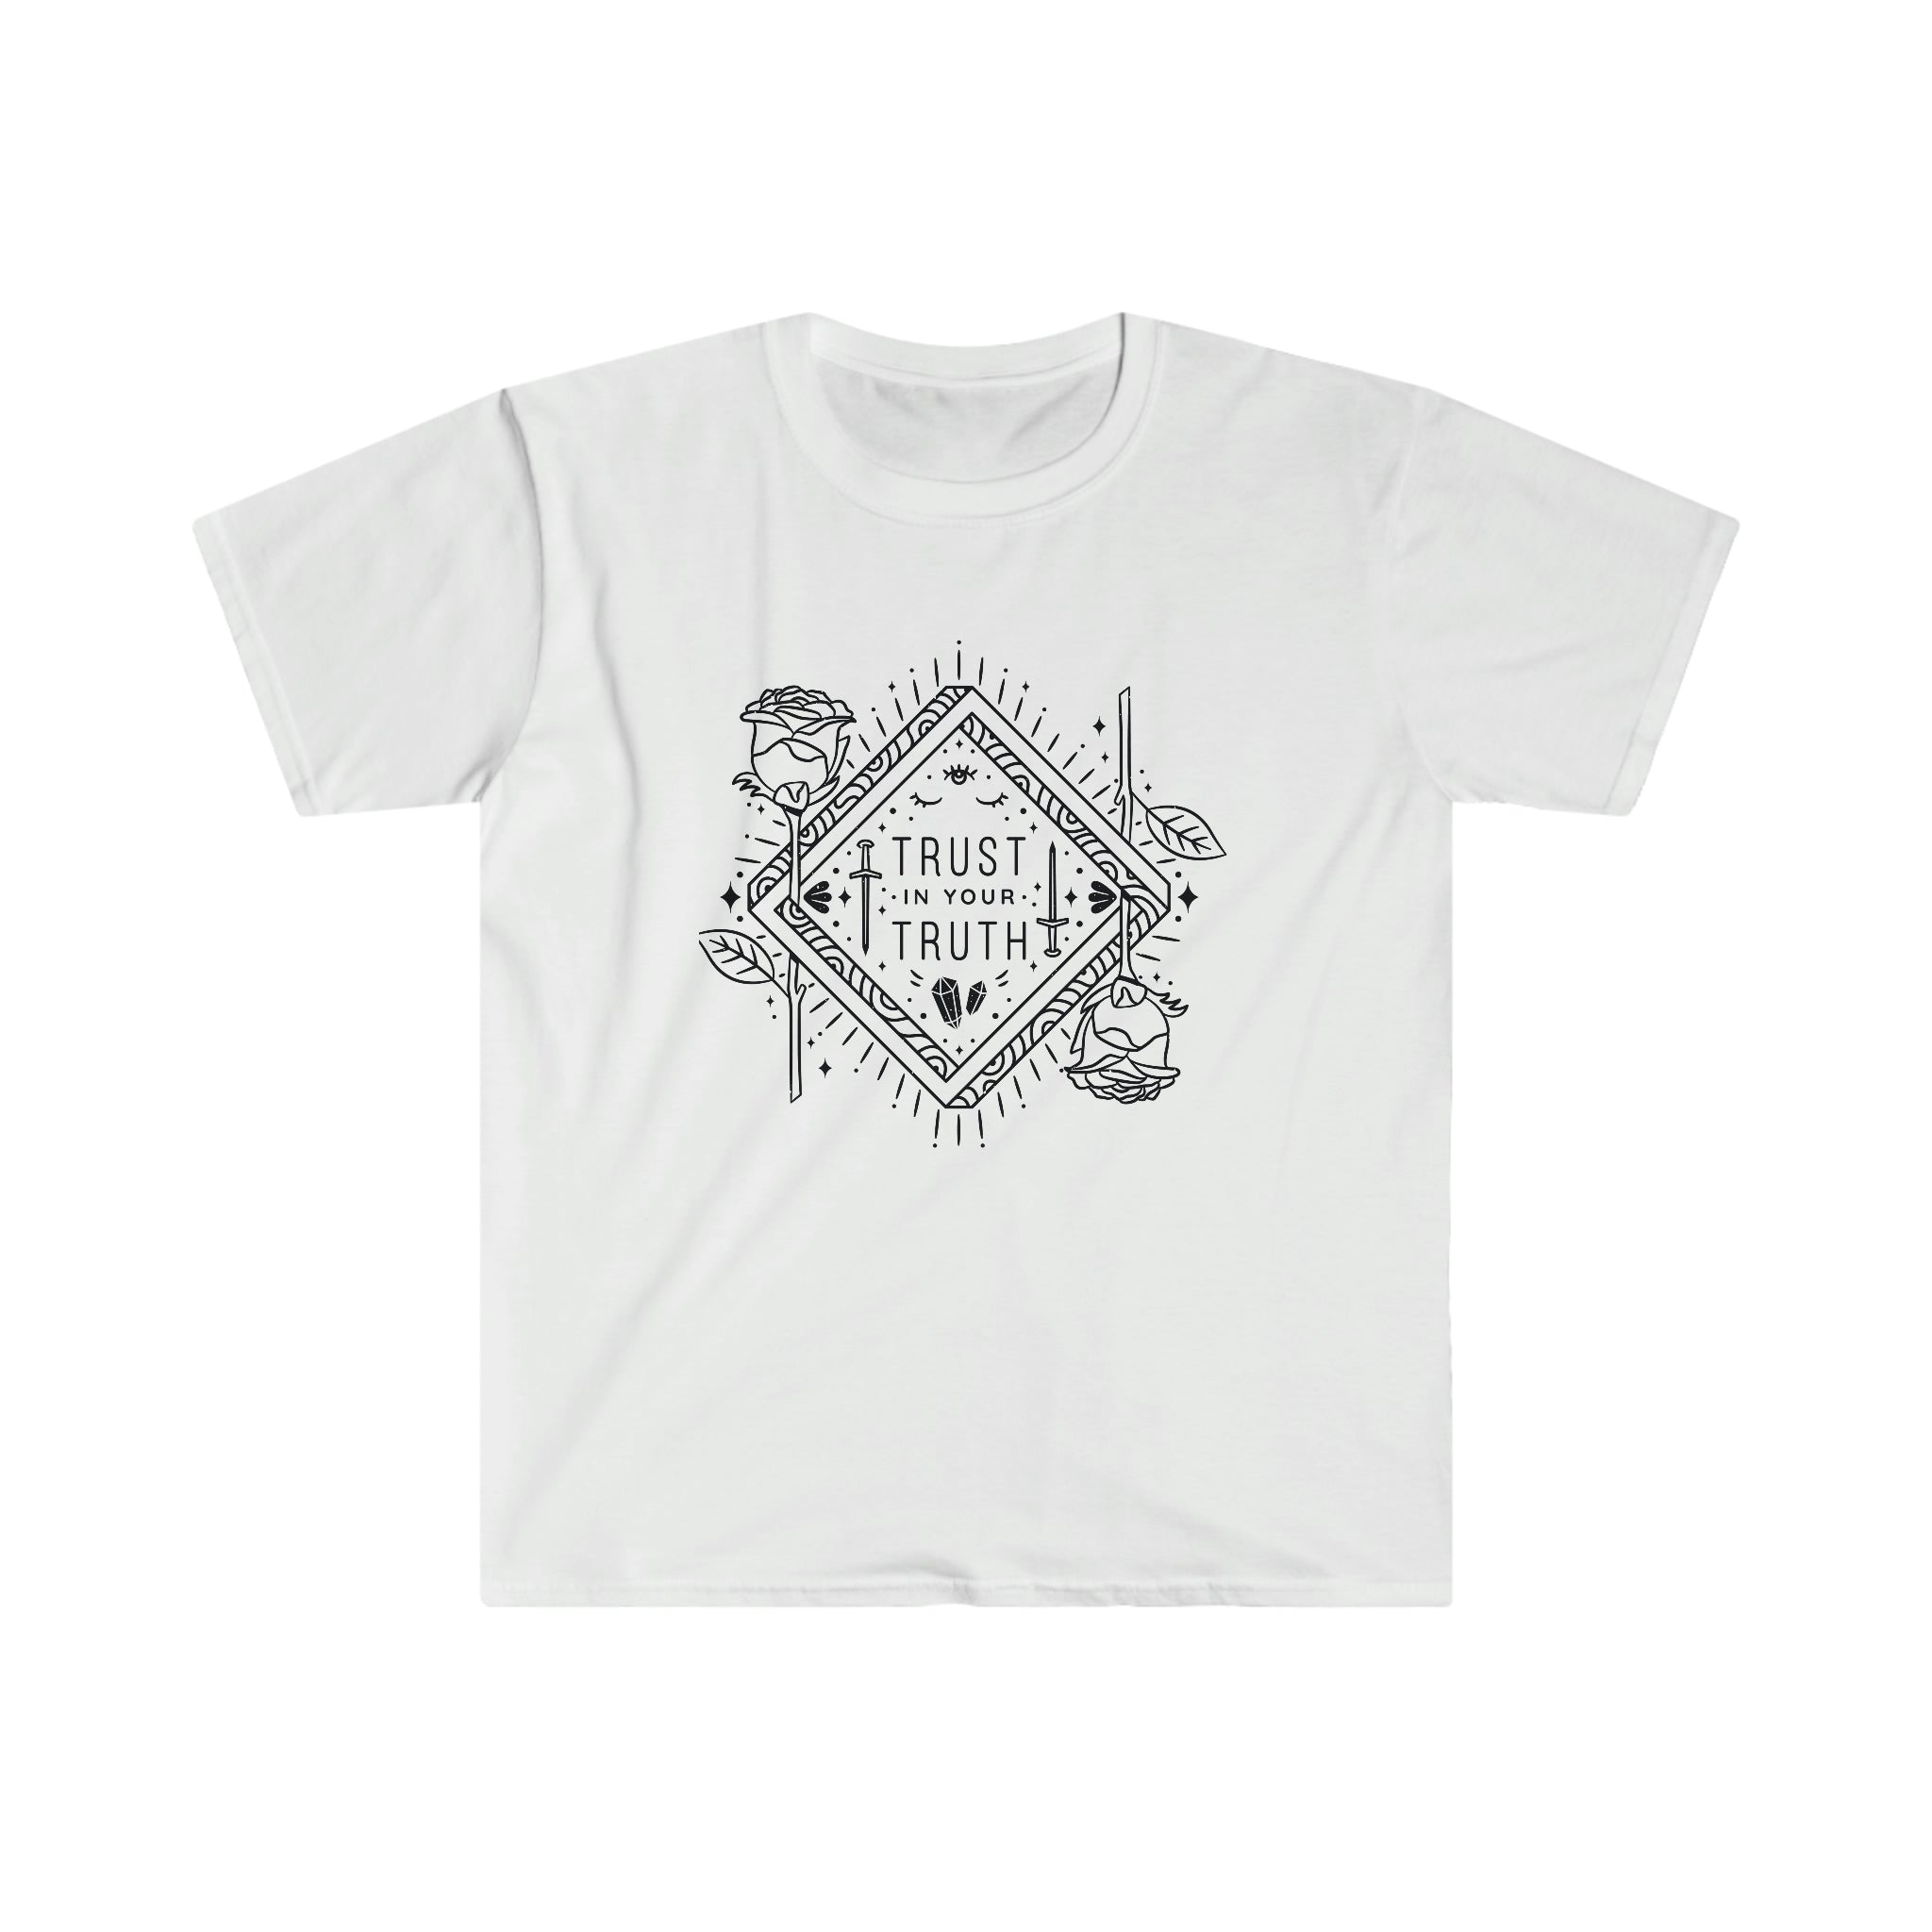 A Trust in Your Truth T-Shirt with a diamond image - stylishly conveying truth and trust.